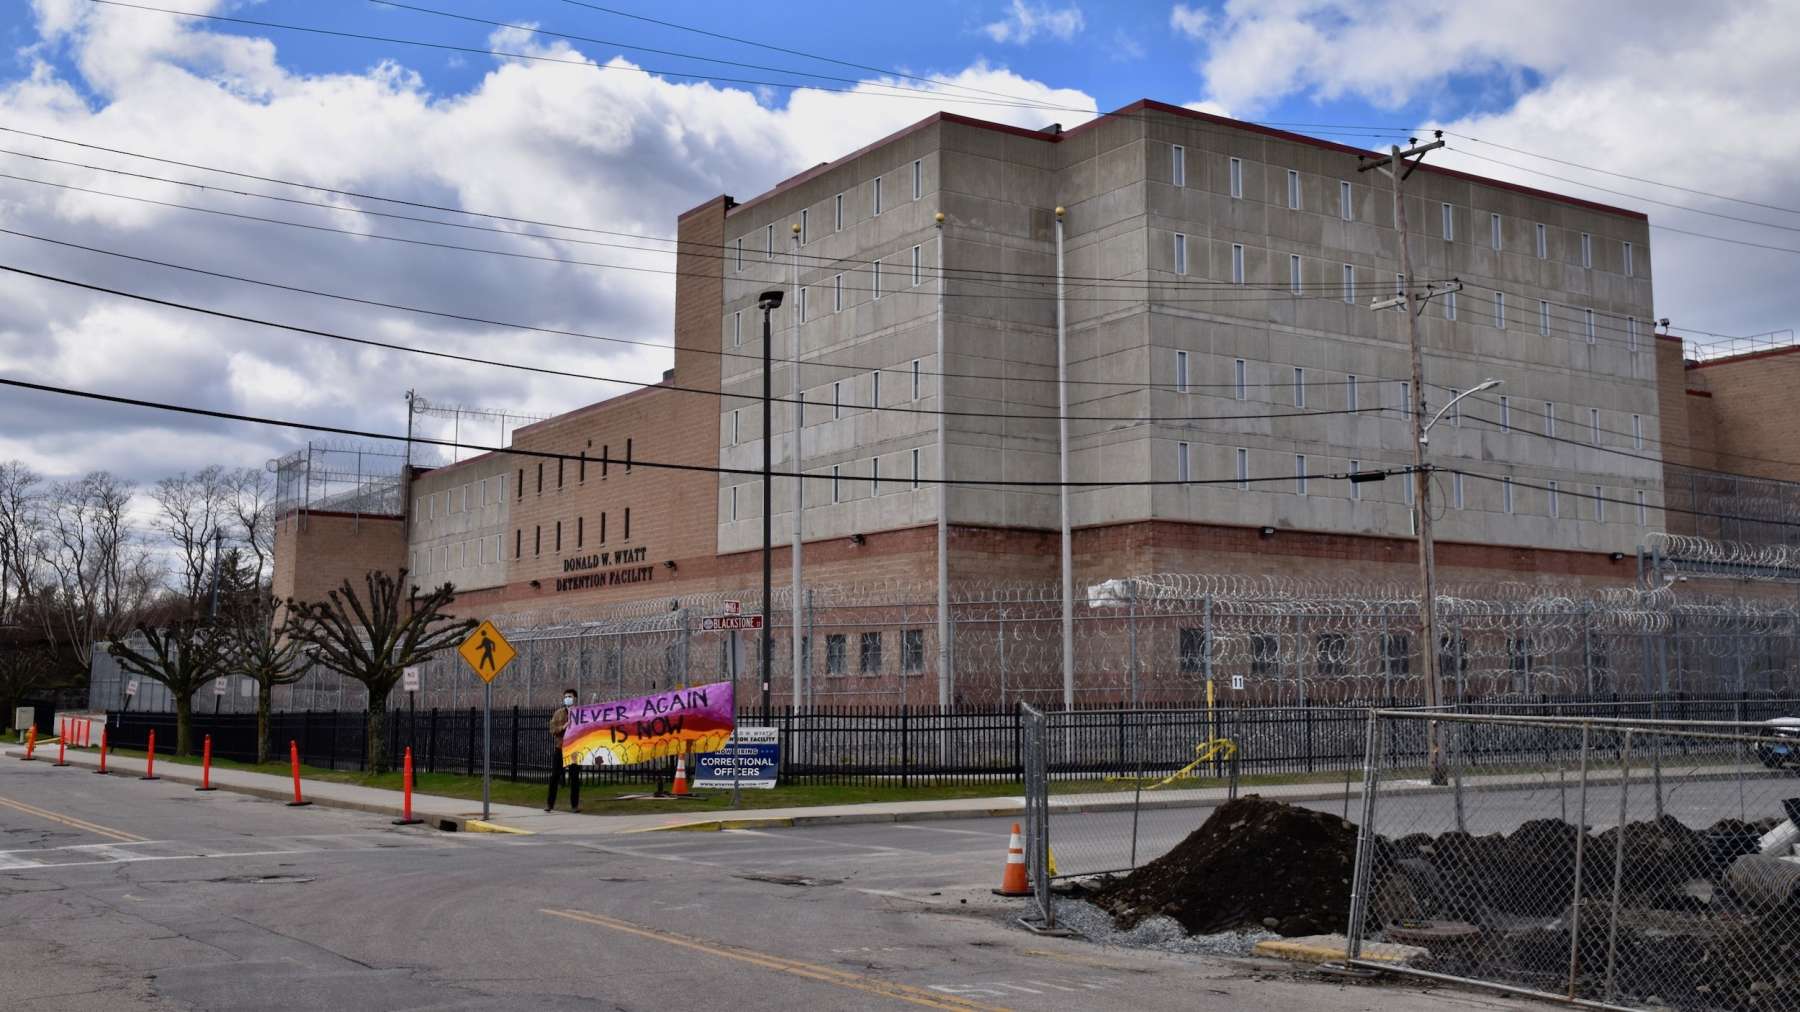 Wyatt inmate tests positive for COVID-19, prison on lockdown